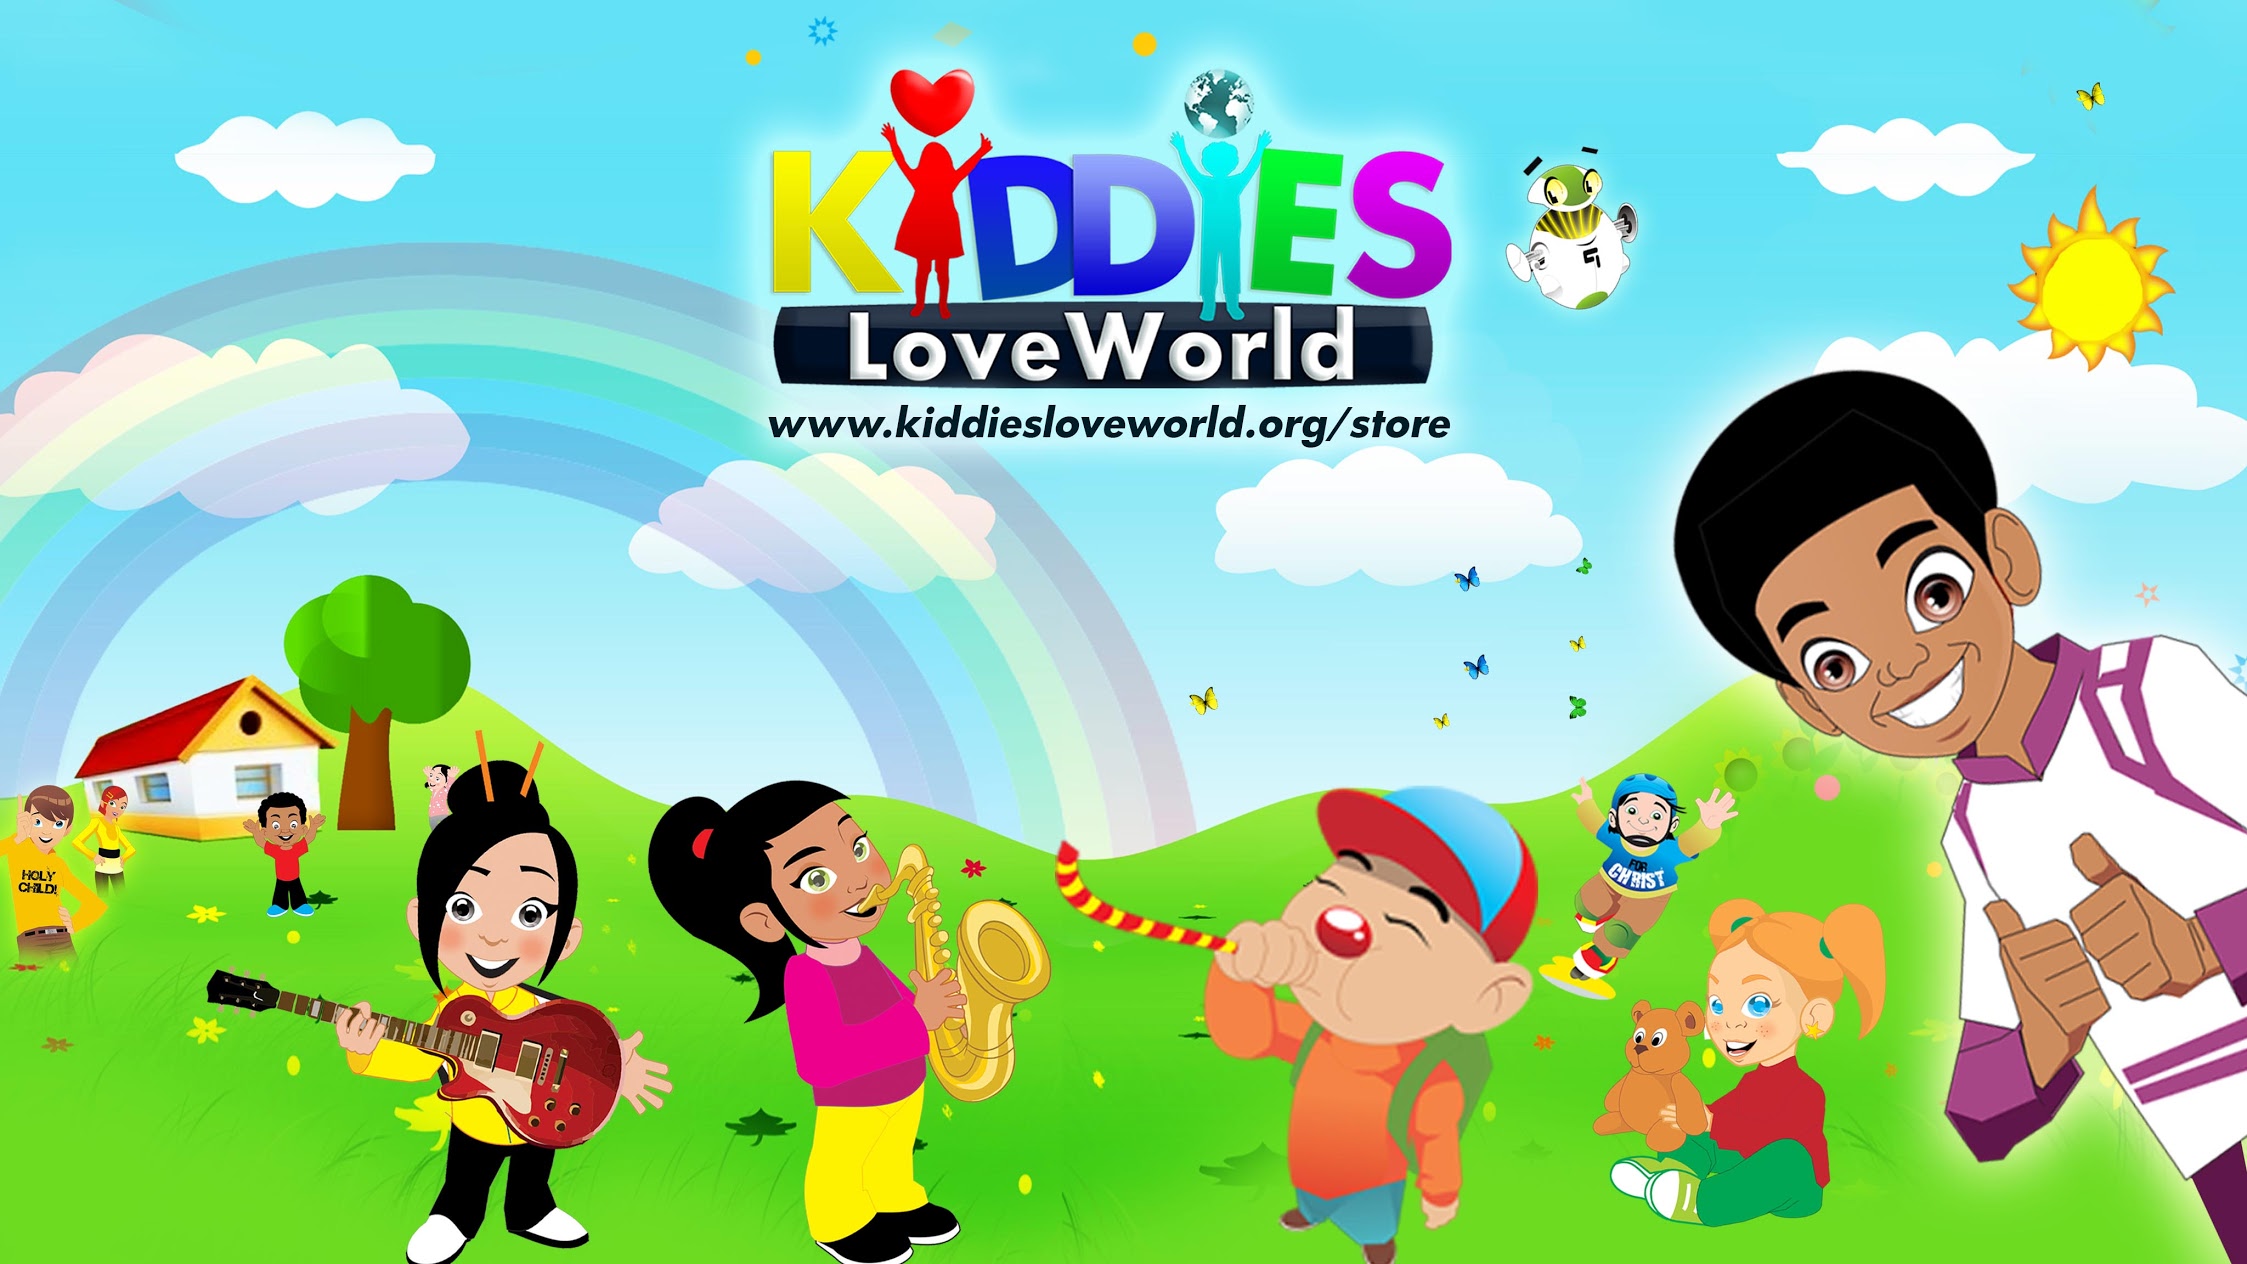 Kiddies LoveWorld - Android Apps on Google Play